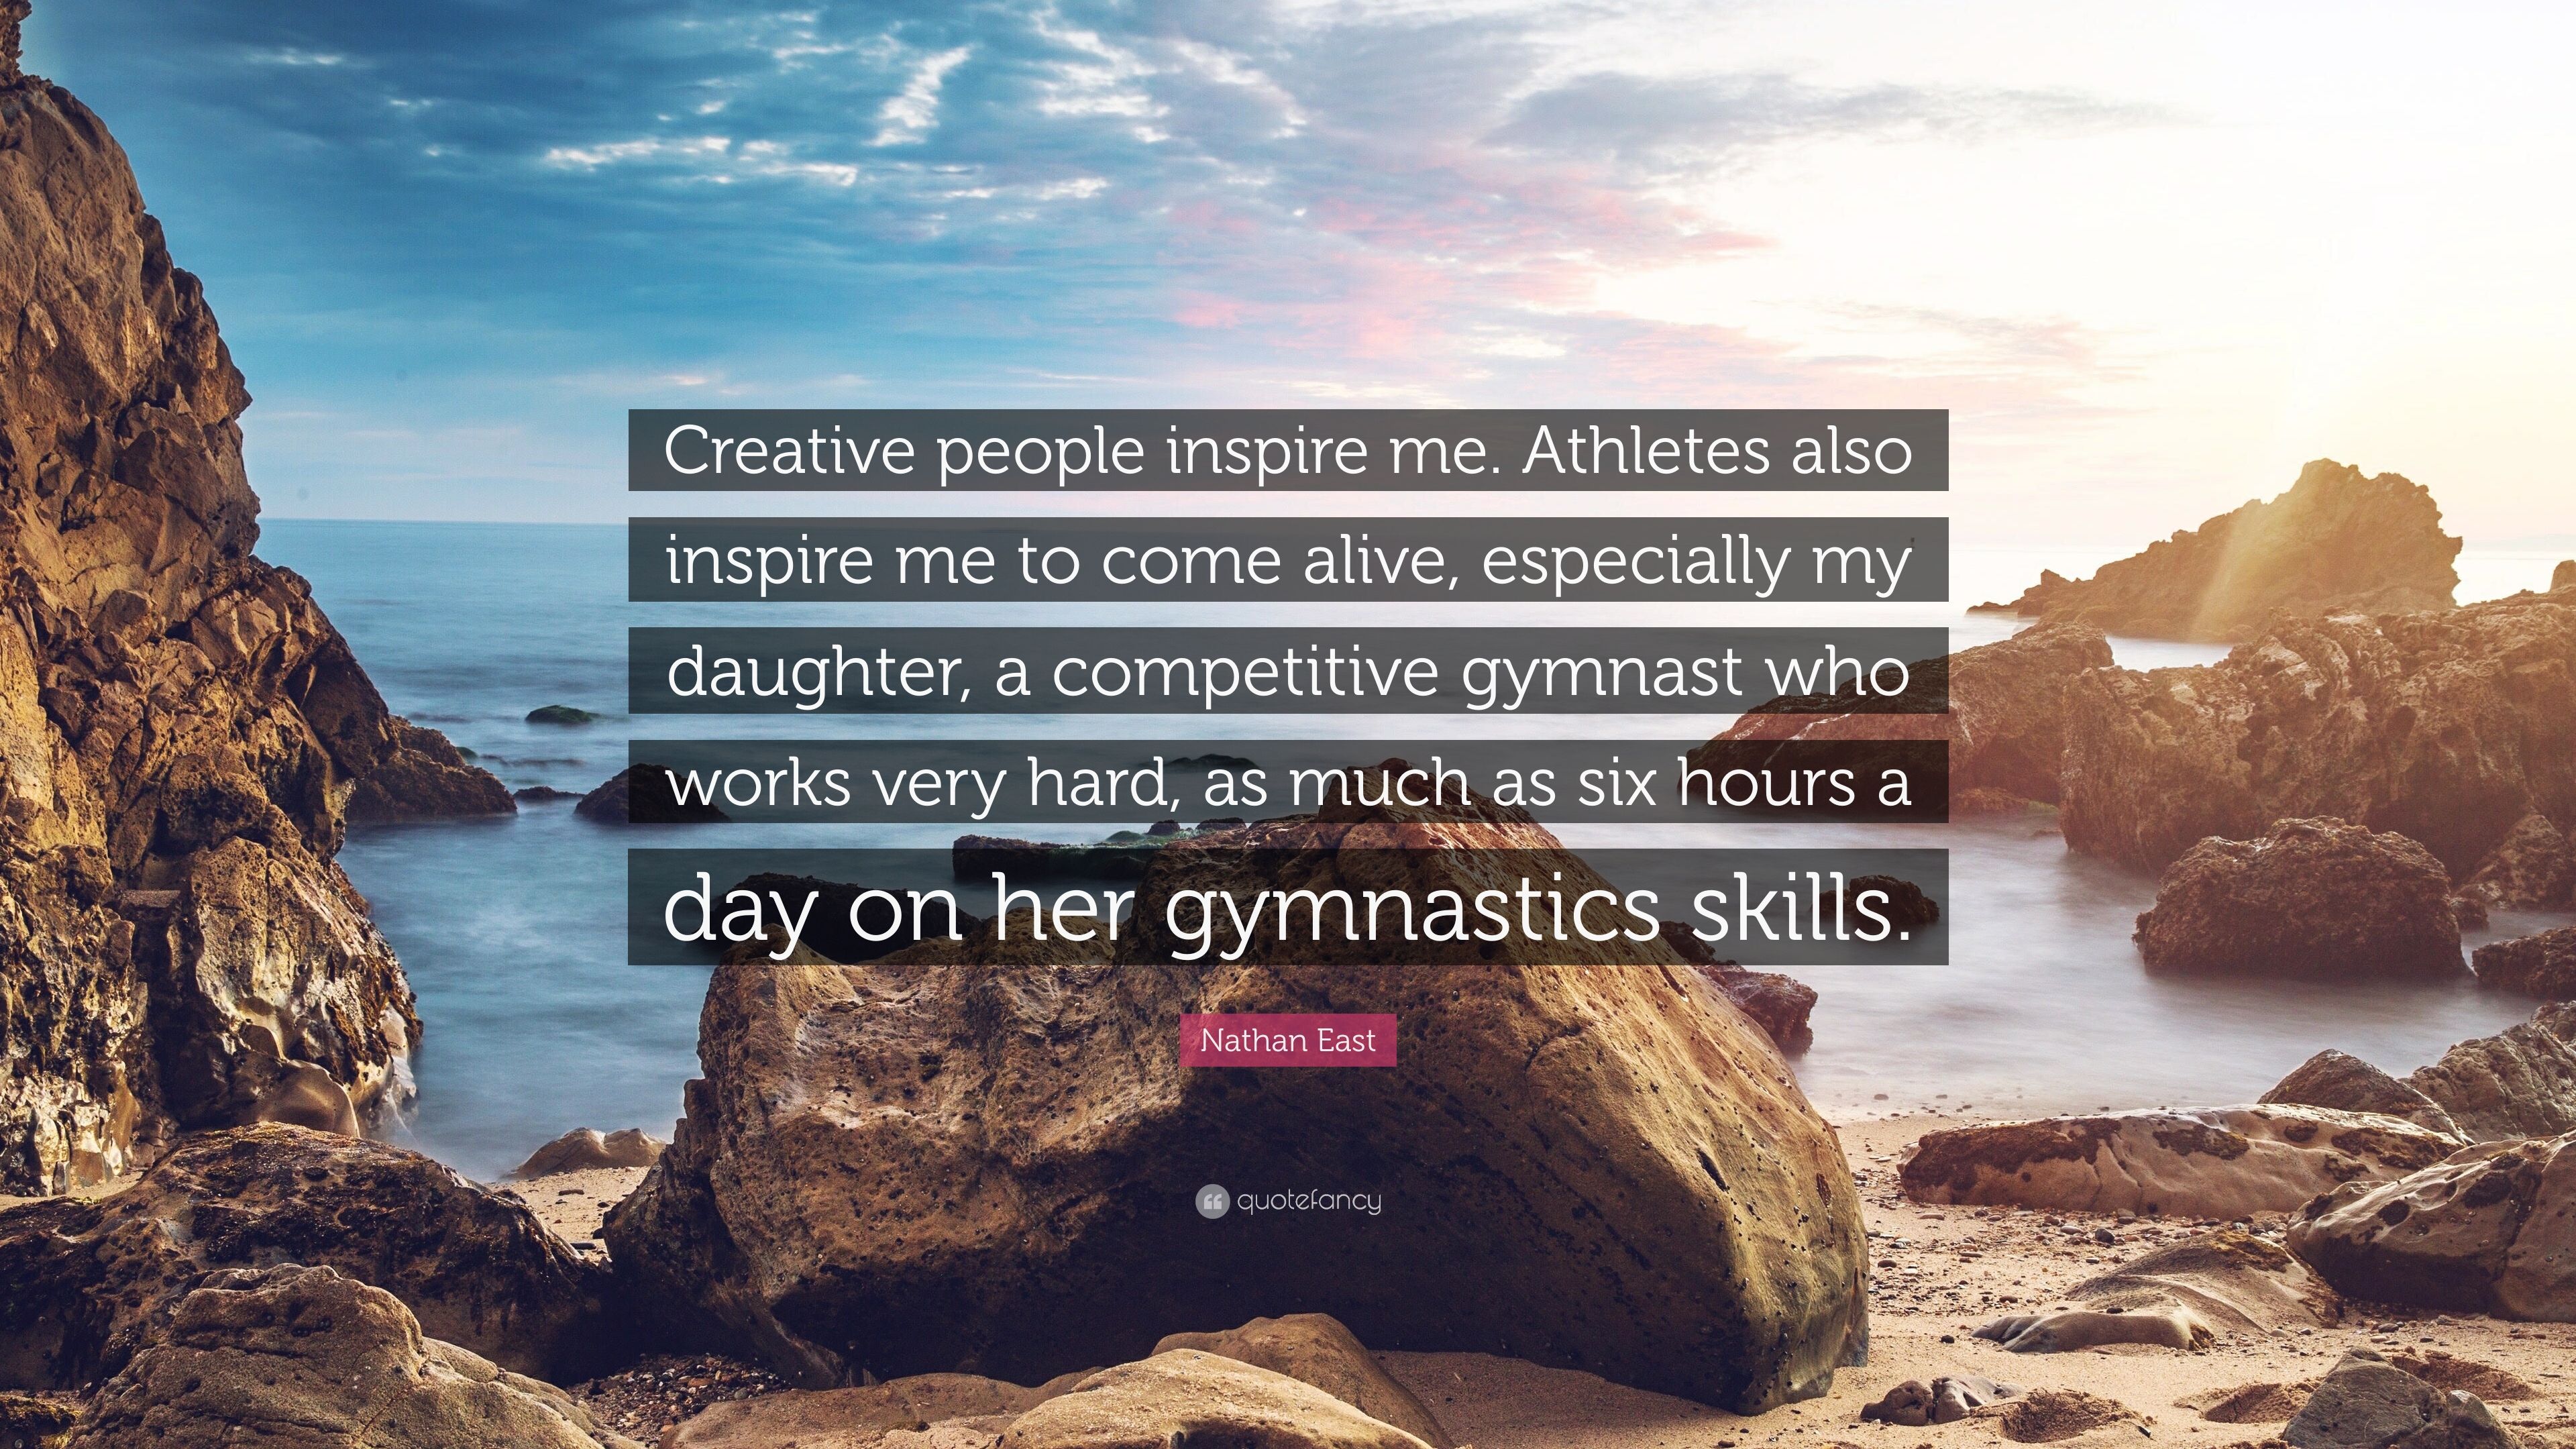 Nathan East Quote: “Creative people inspire me. Athletes